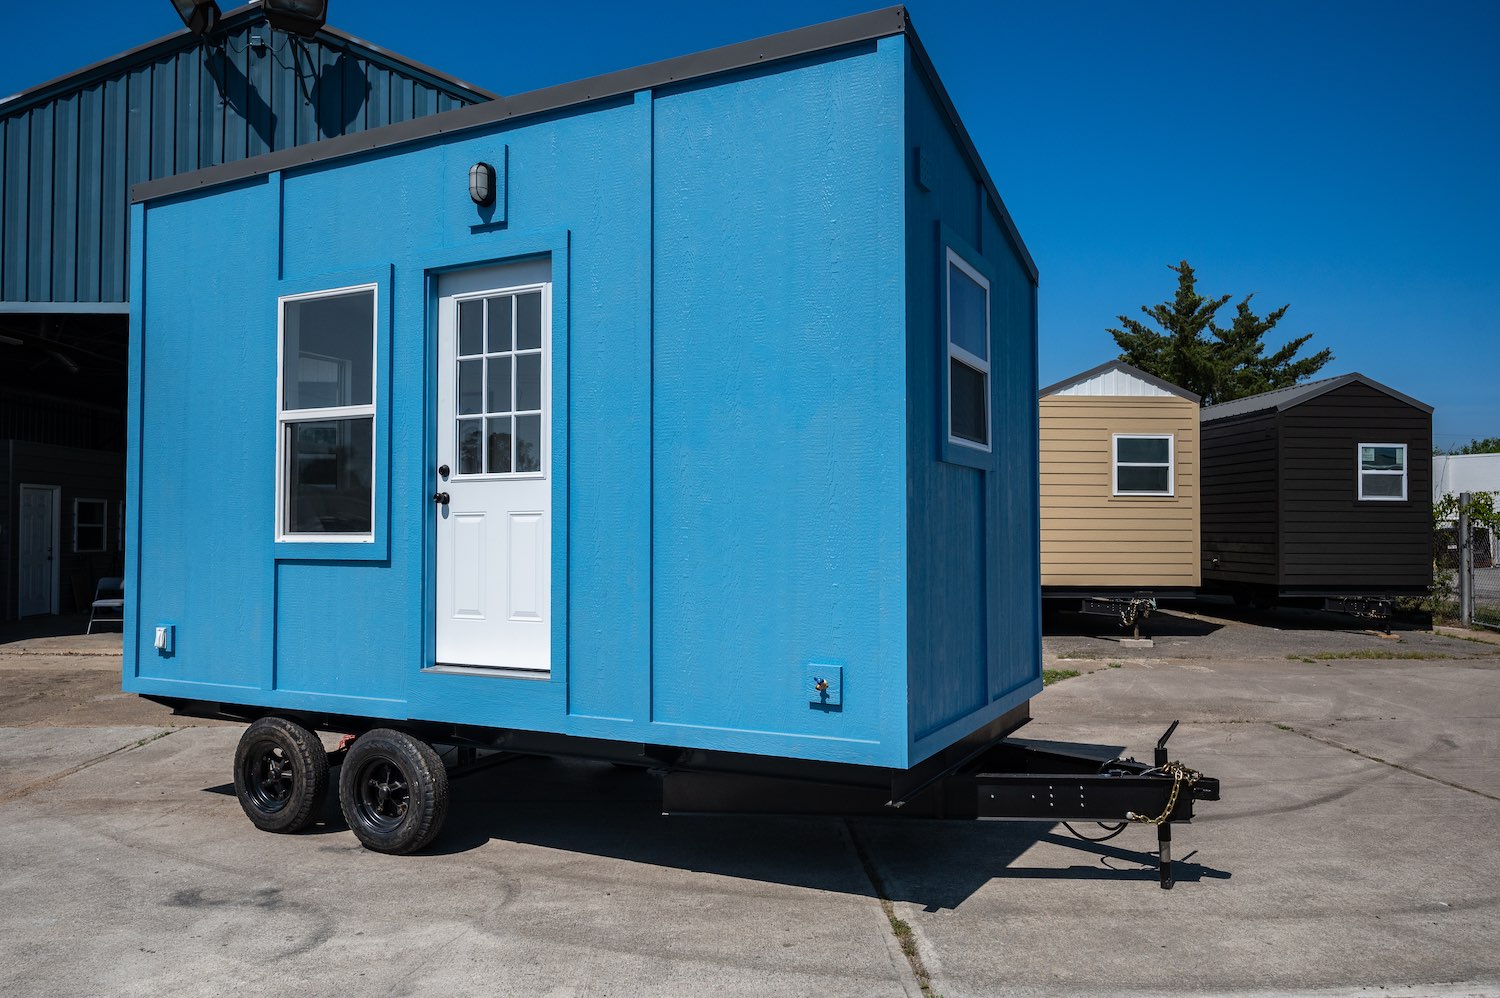 The-Lad-Affordable-Certified-Tiny-House